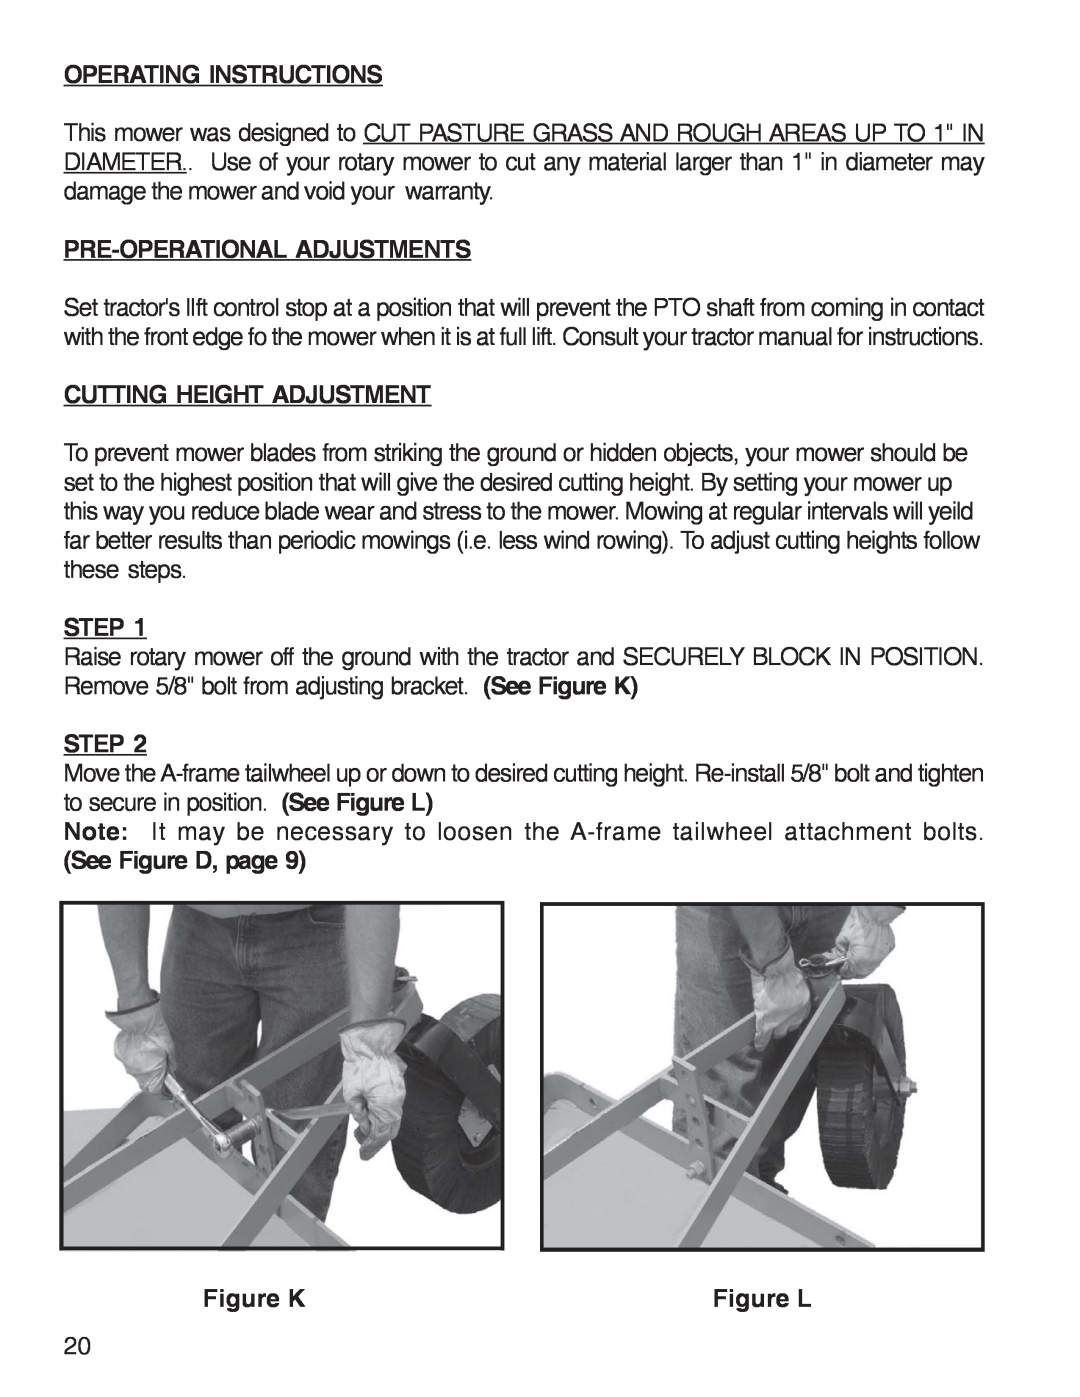 King Kutter Rotary Mower Operating Instructions, Pre-Operational Adjustments, Cutting Height Adjustment, Step, Figure K 